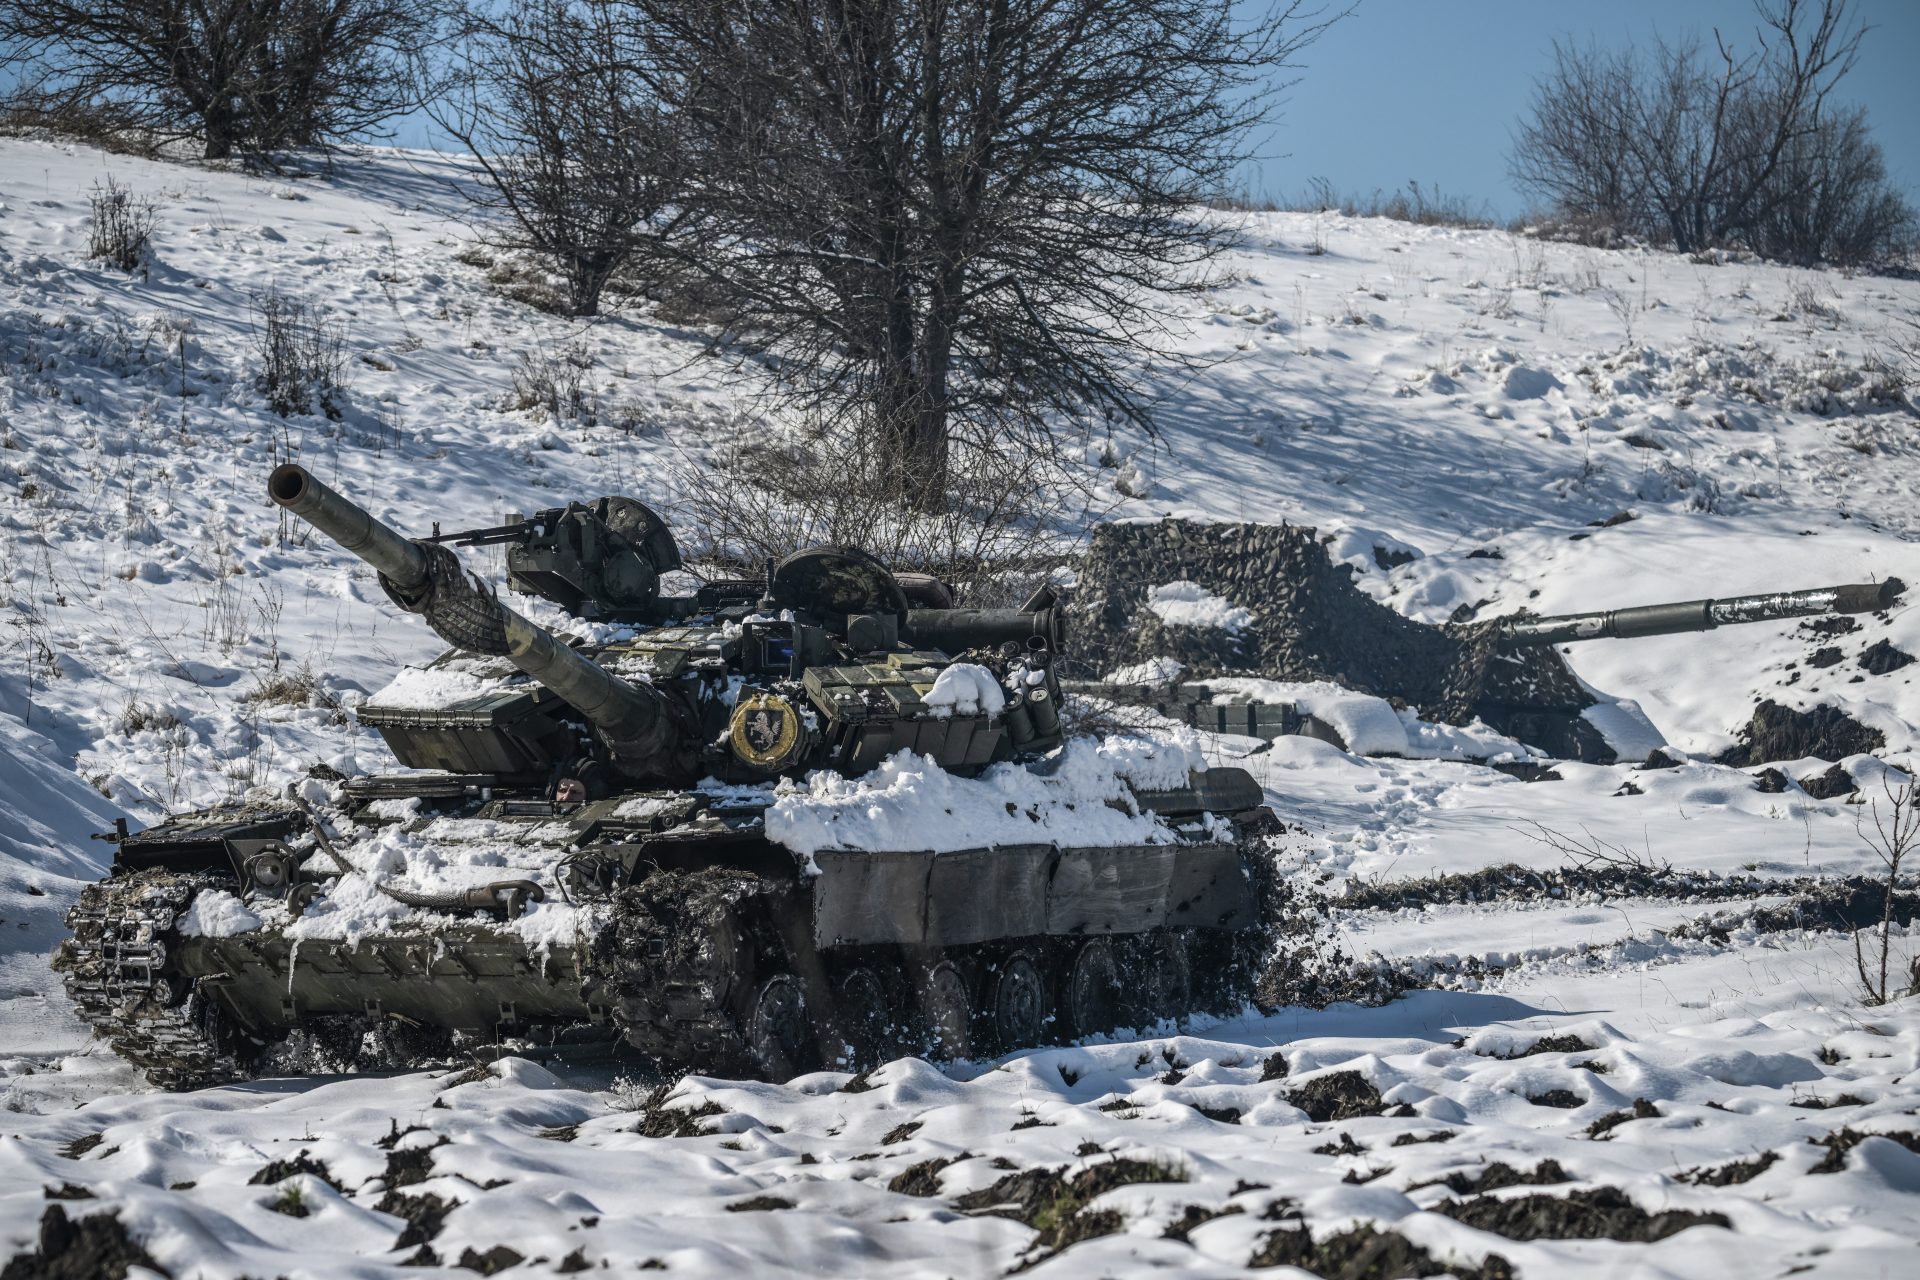 Winter is coming but Ukraine has plans to continue its offensive